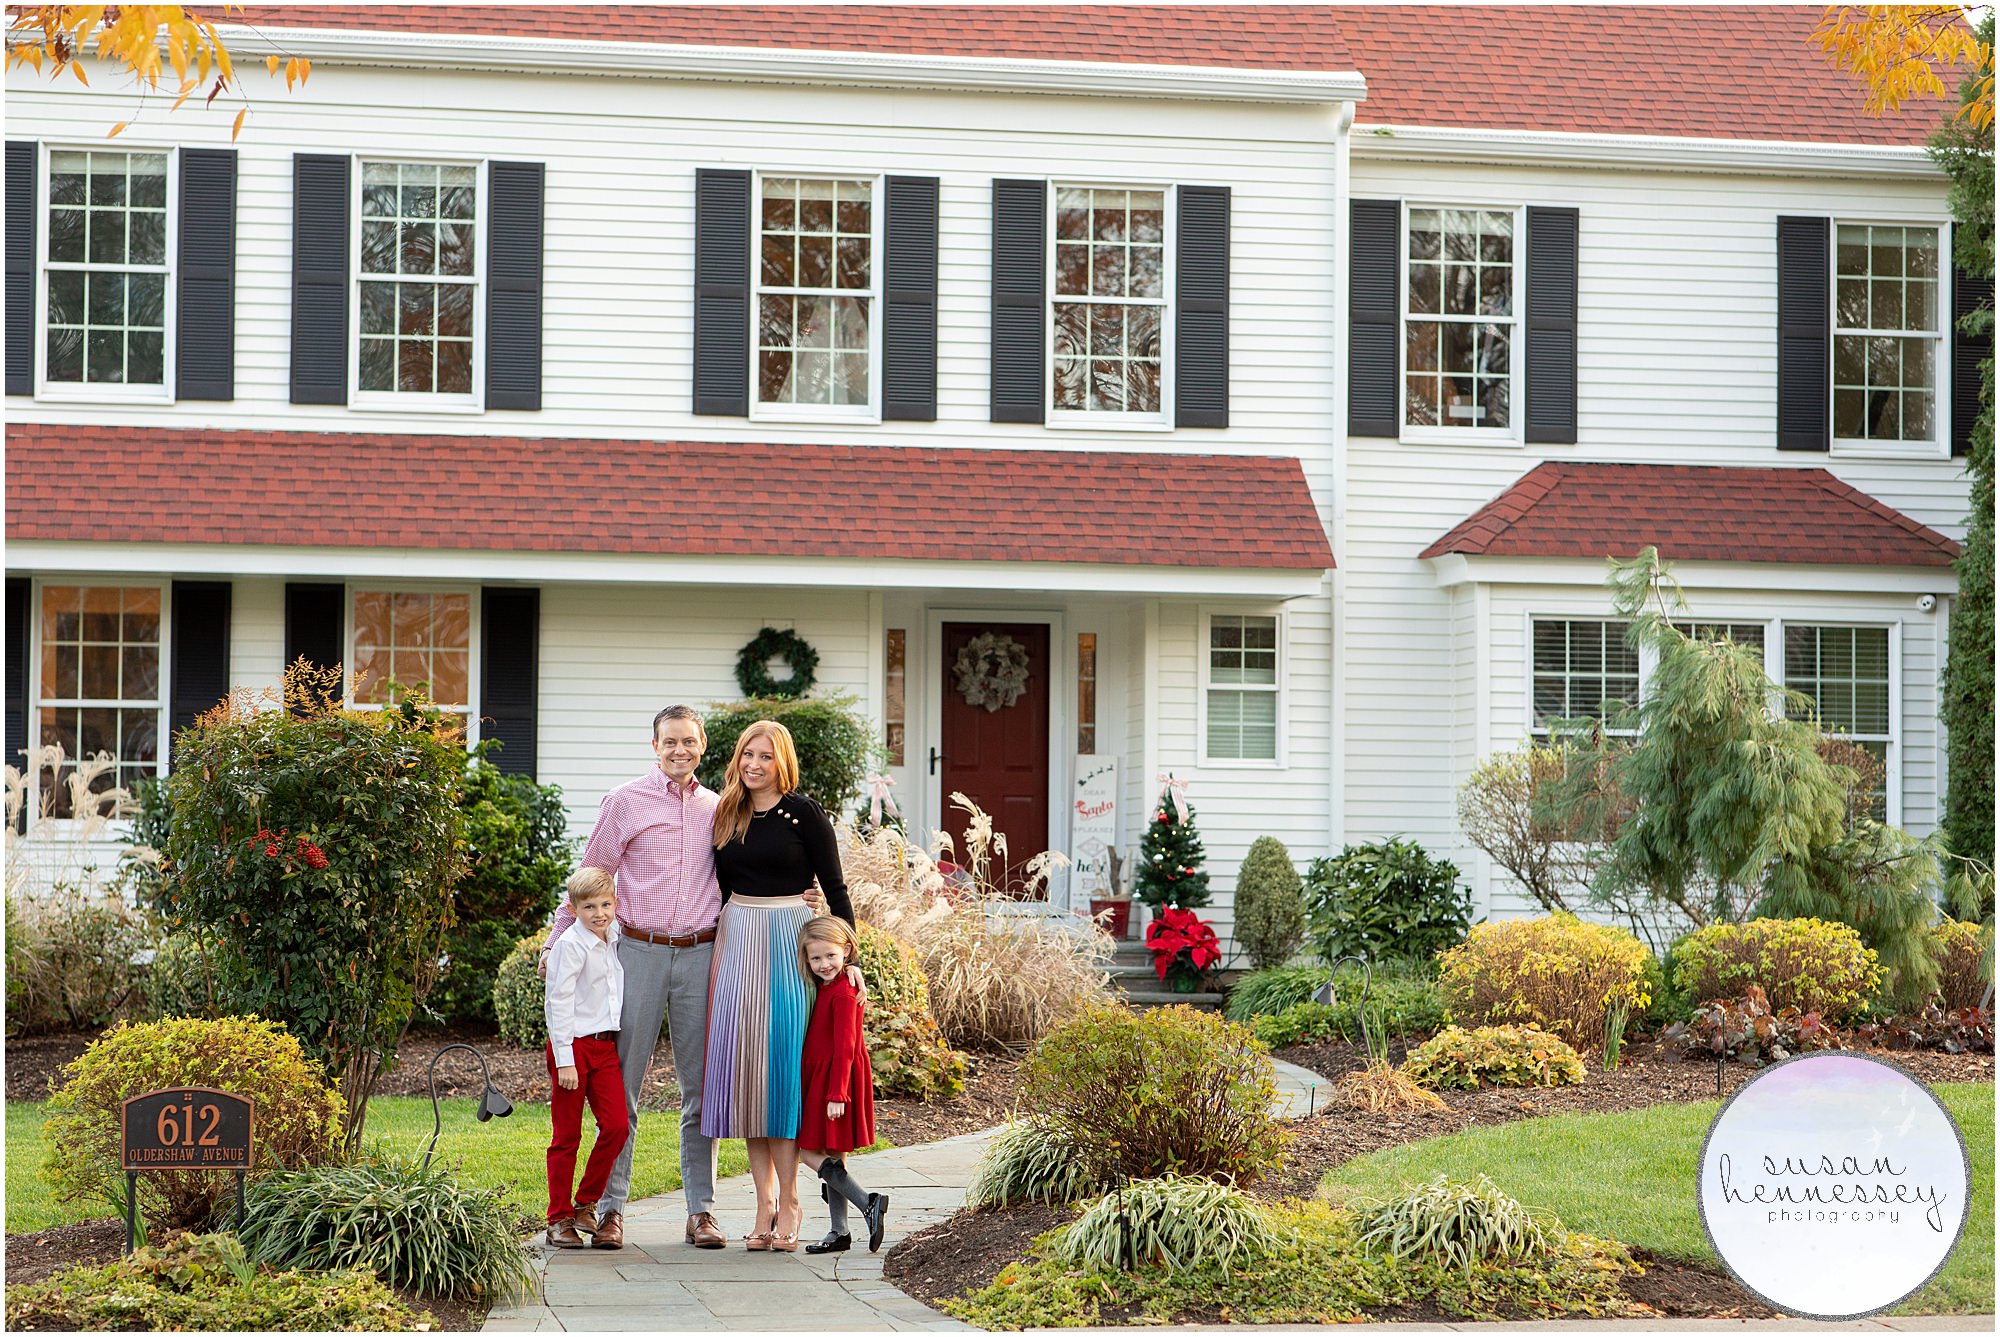 Your home is the perfect backdrop for your South Jersey holiday family photo session